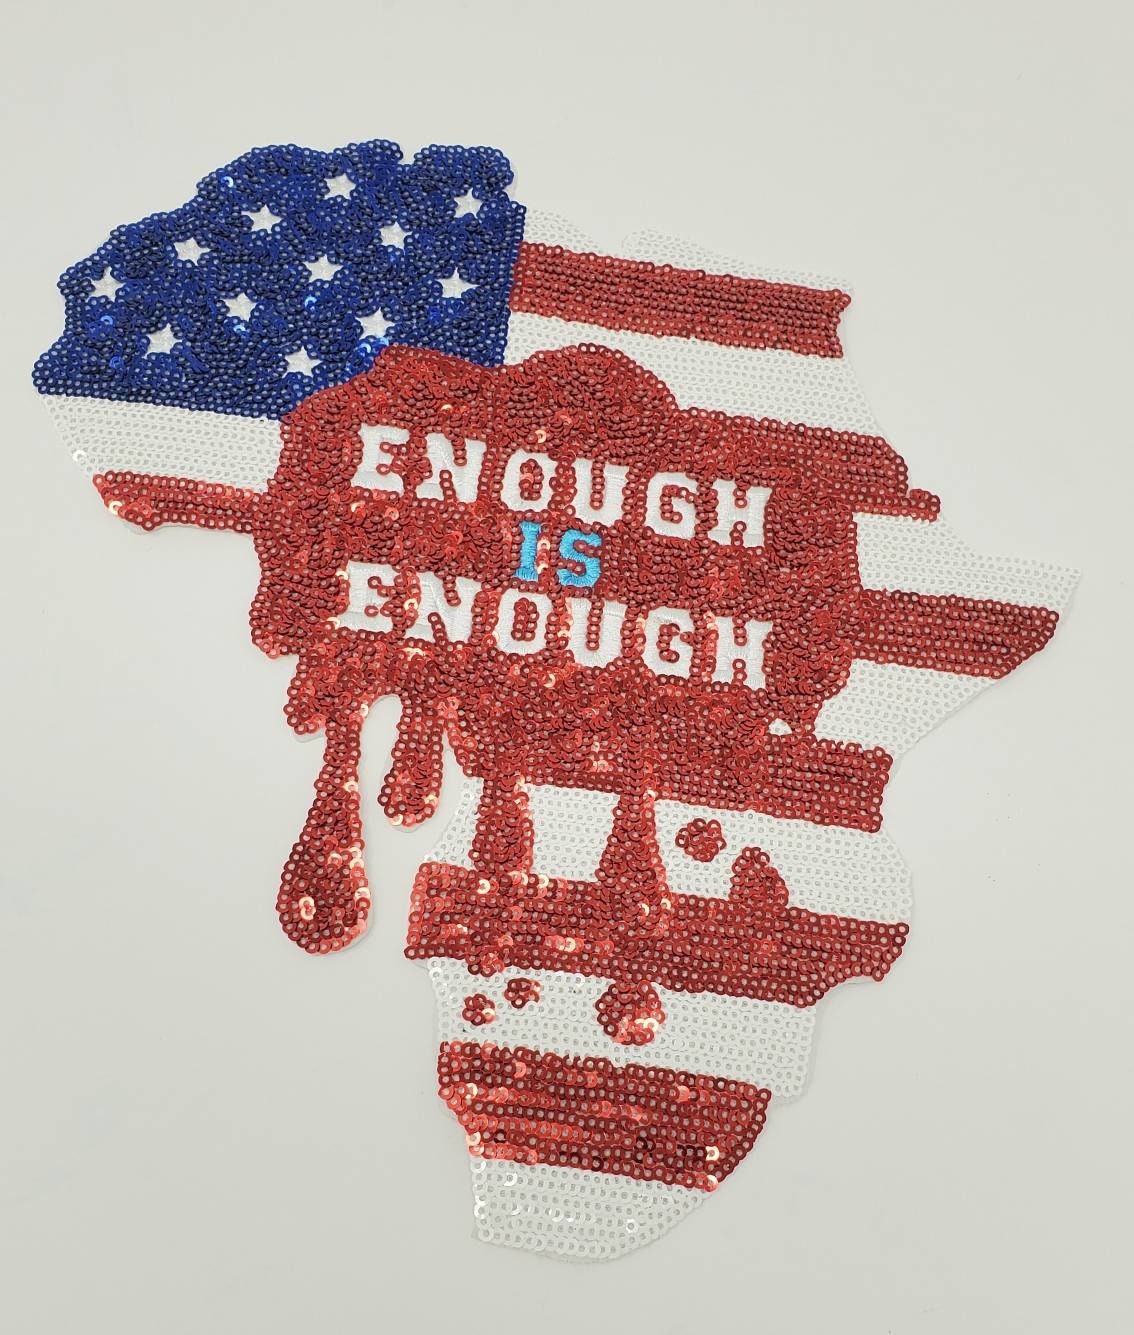 Exclusive SEQUINS, "Enough is Enough" Blood Shed | African-American Flag | Iron-On Patch,Size 10", Collectable Applique, Large Jacket Patch